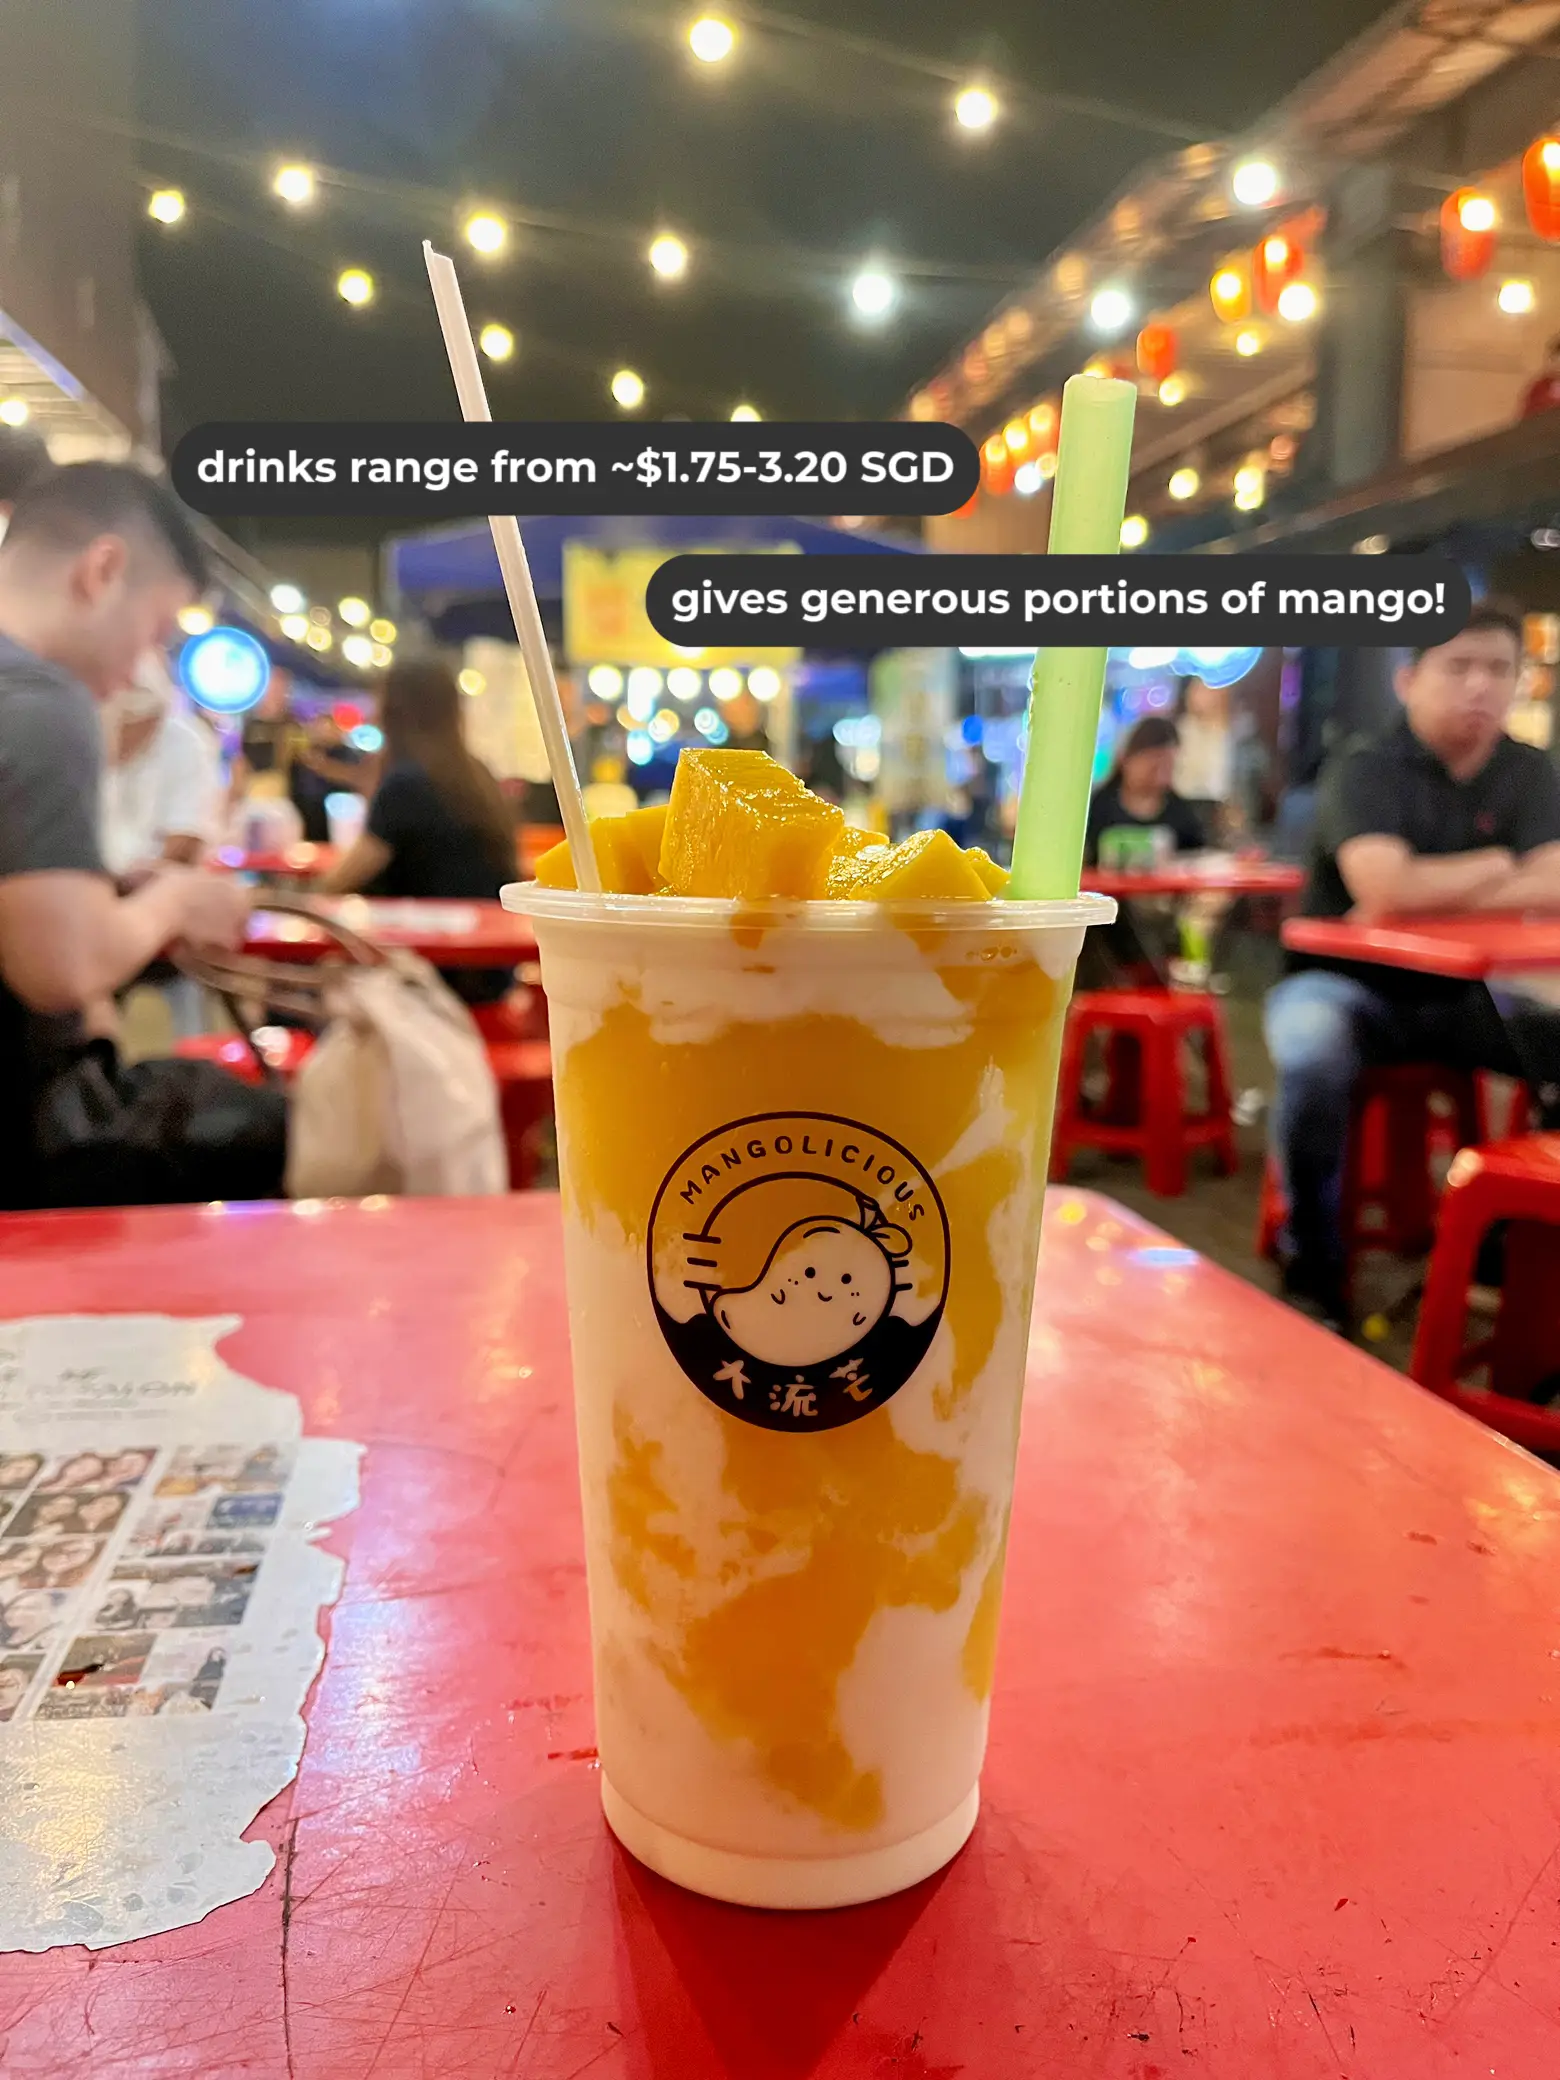 the best mango ice-blend for ~$2SGD only 🫨🤌🏻, jb